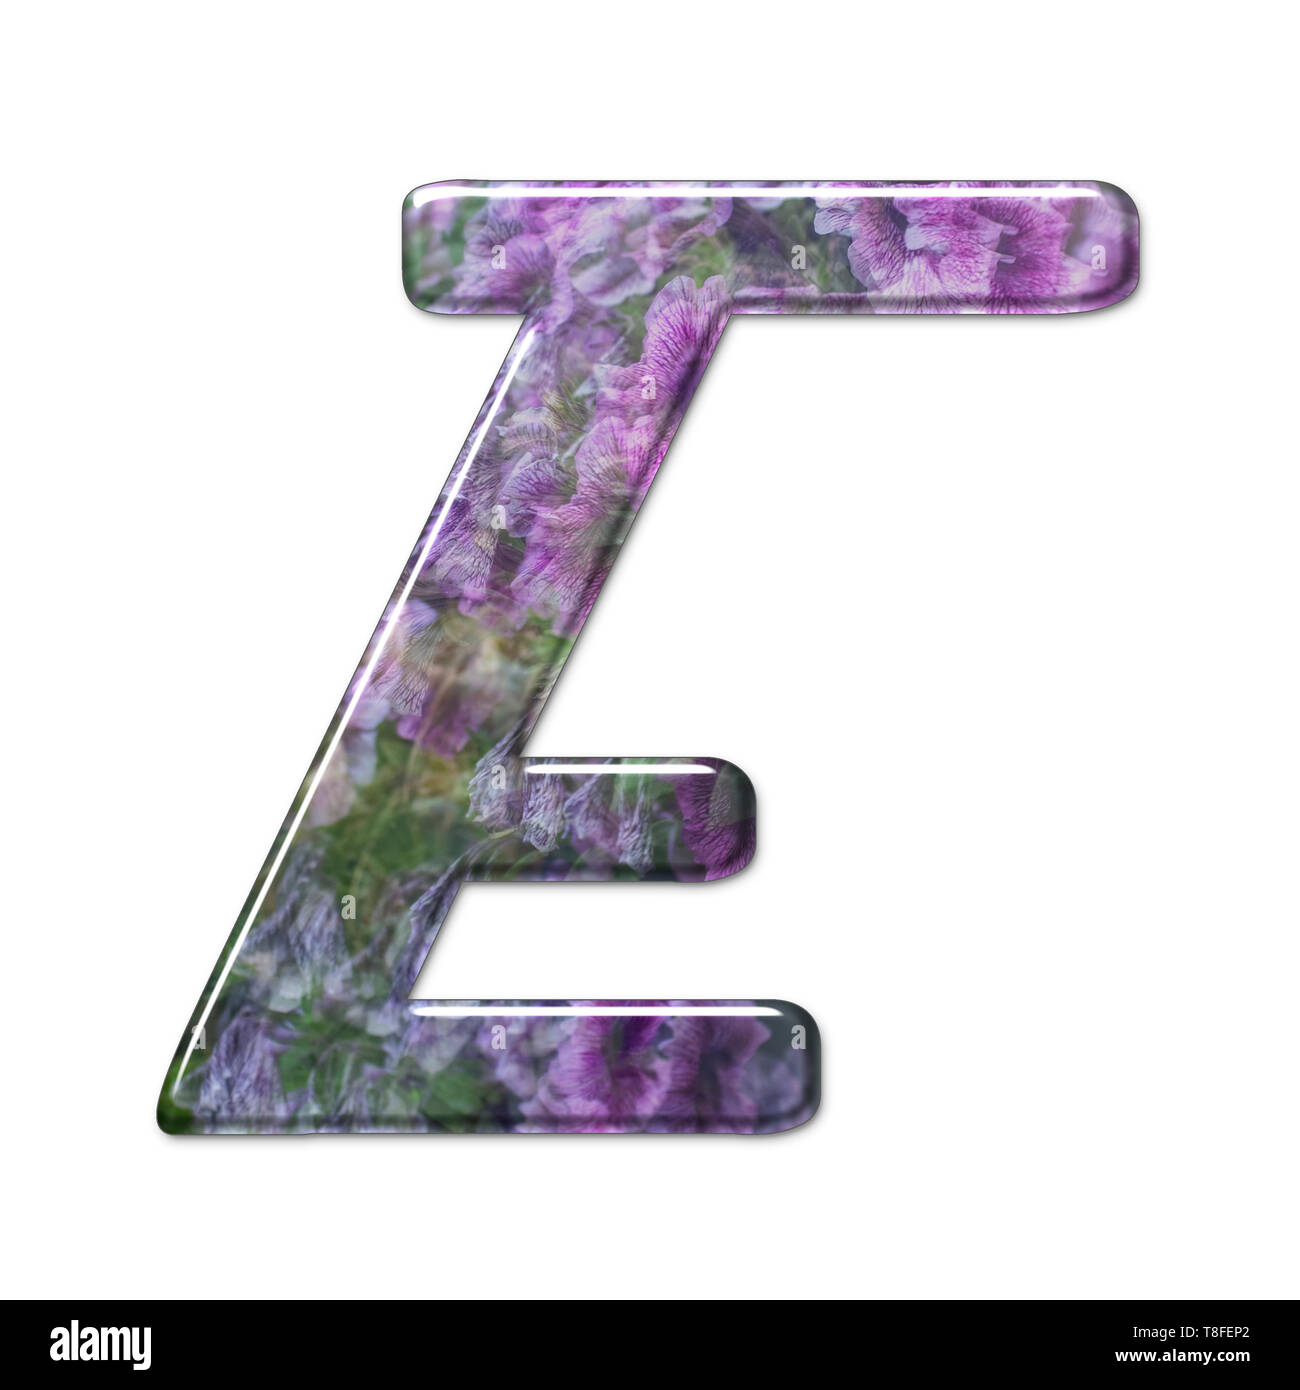 The Capitol Letter E Part of a set of letters, Numbers and symbols of 3D Alphabet made with a floral image on white background Stock Photo